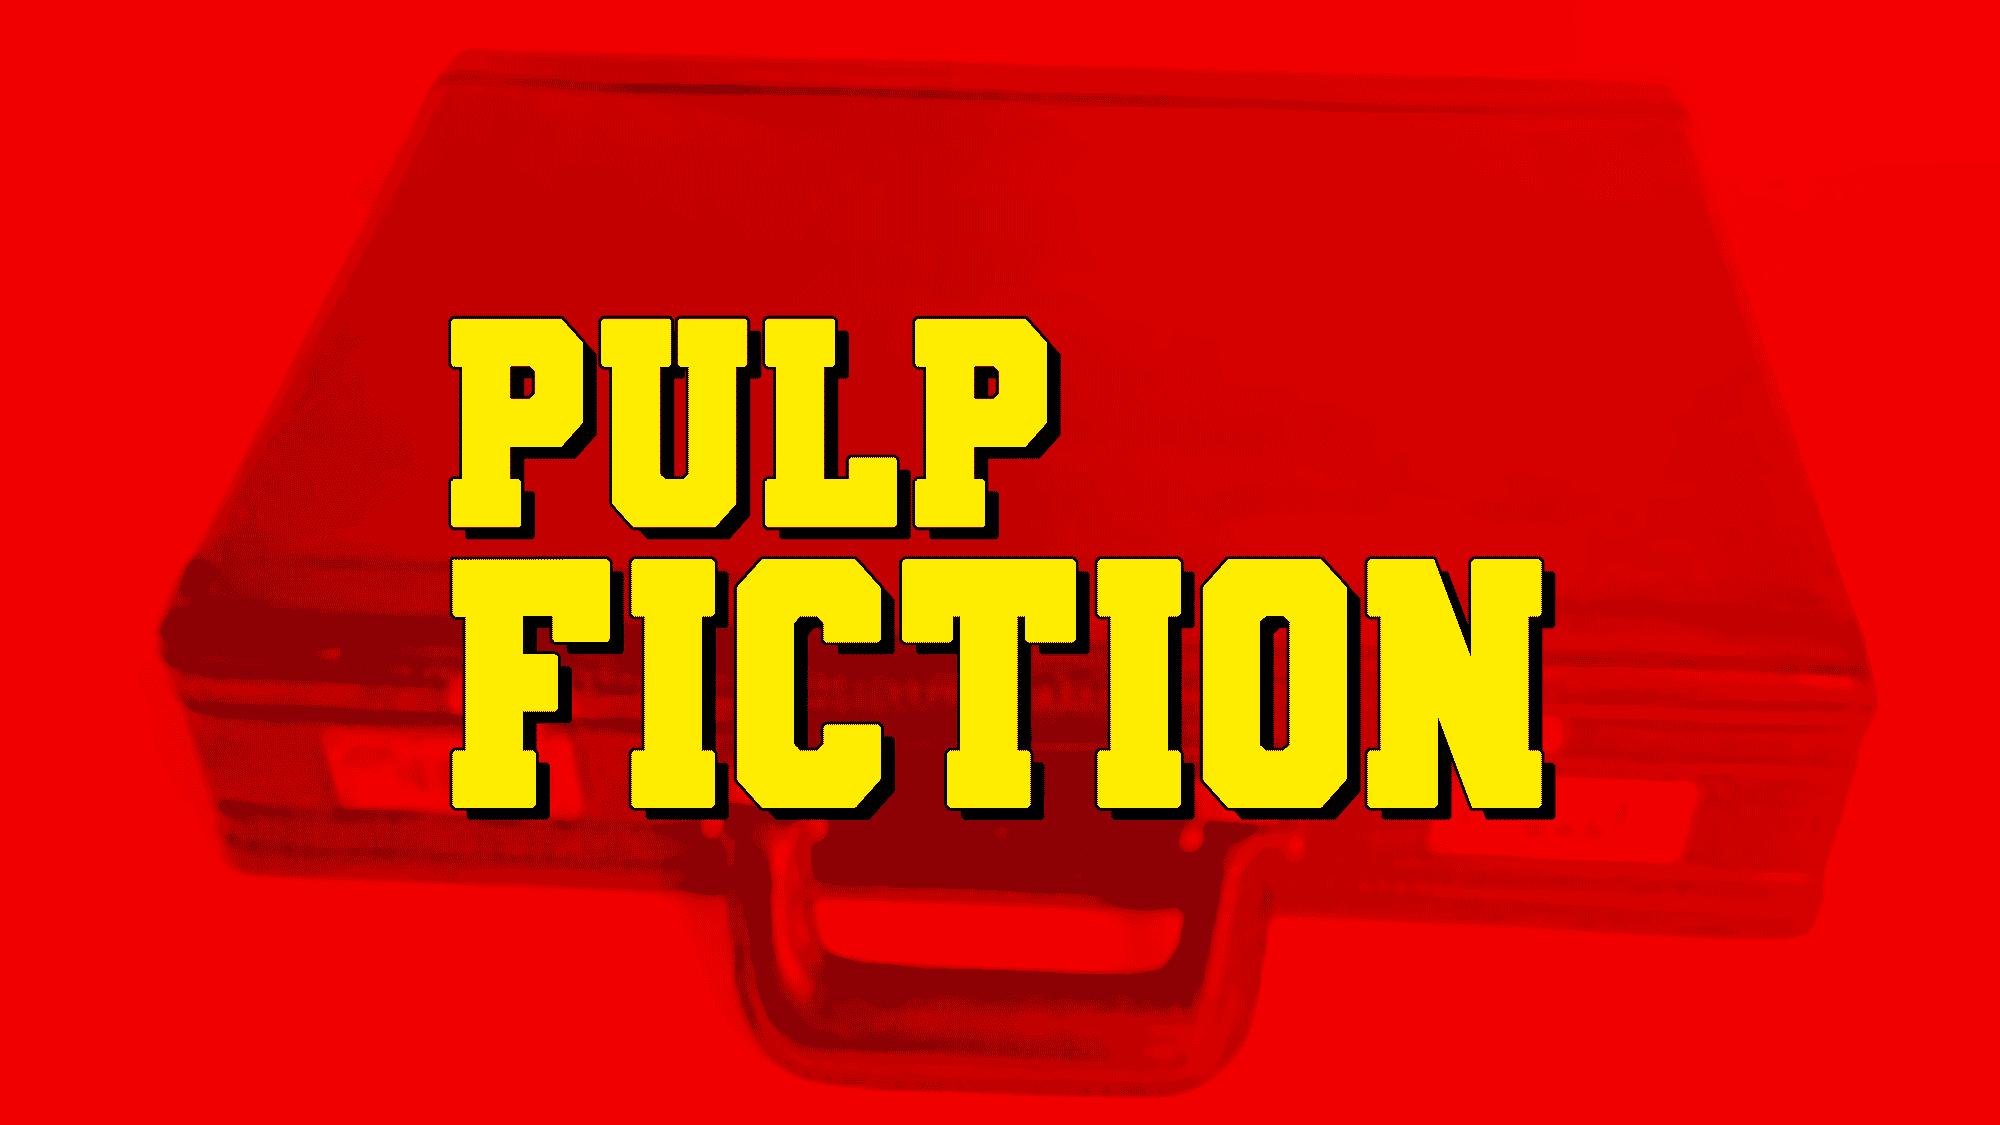 What Was Inside The Pulp Fiction Briefcase?